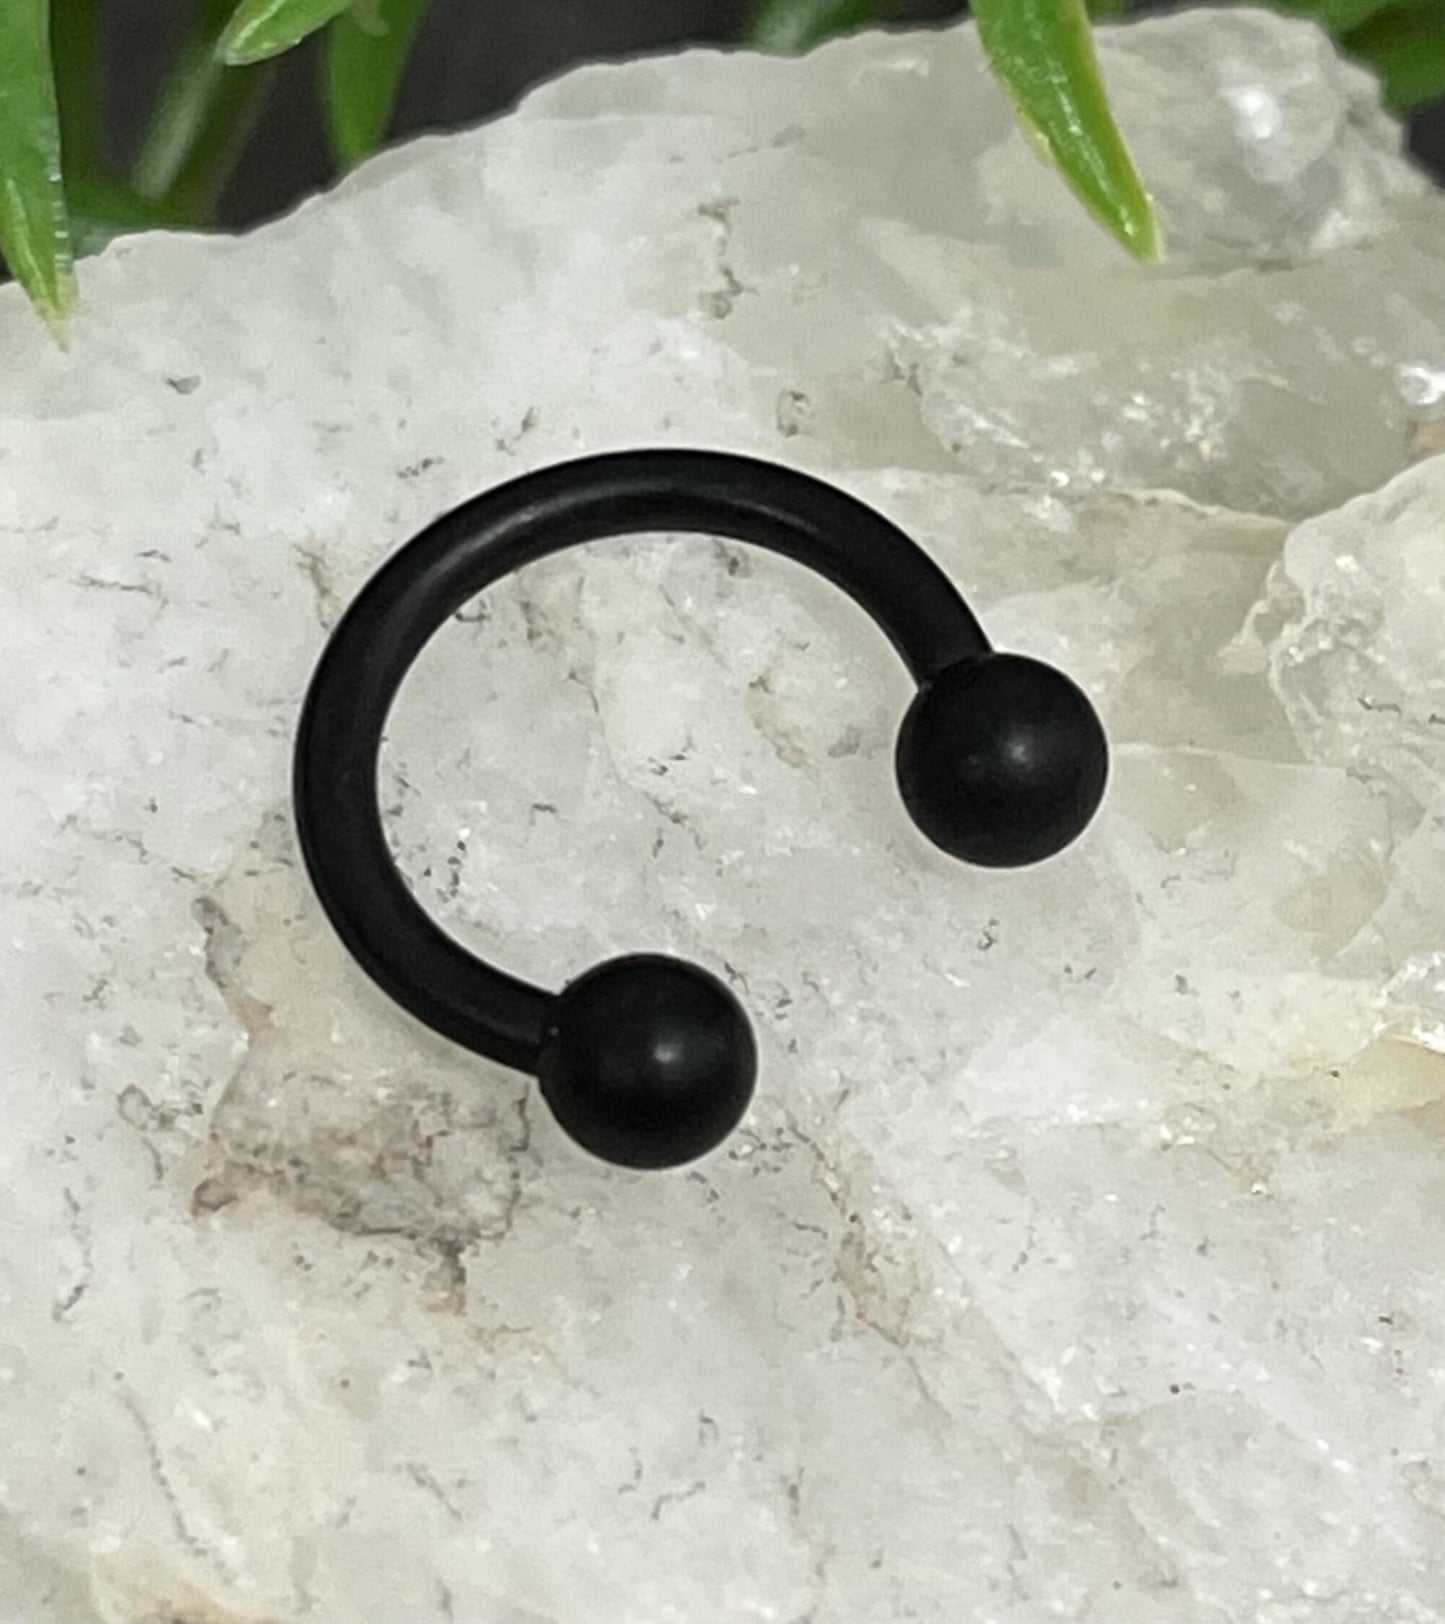 1 Piece Unique Matte Black IP Circular Barbell Horseshoe Ring - 16g, 14g- Internal Diameter 6mm, 8mm, 10mm - Ball Size 3mm or 4mm Available!